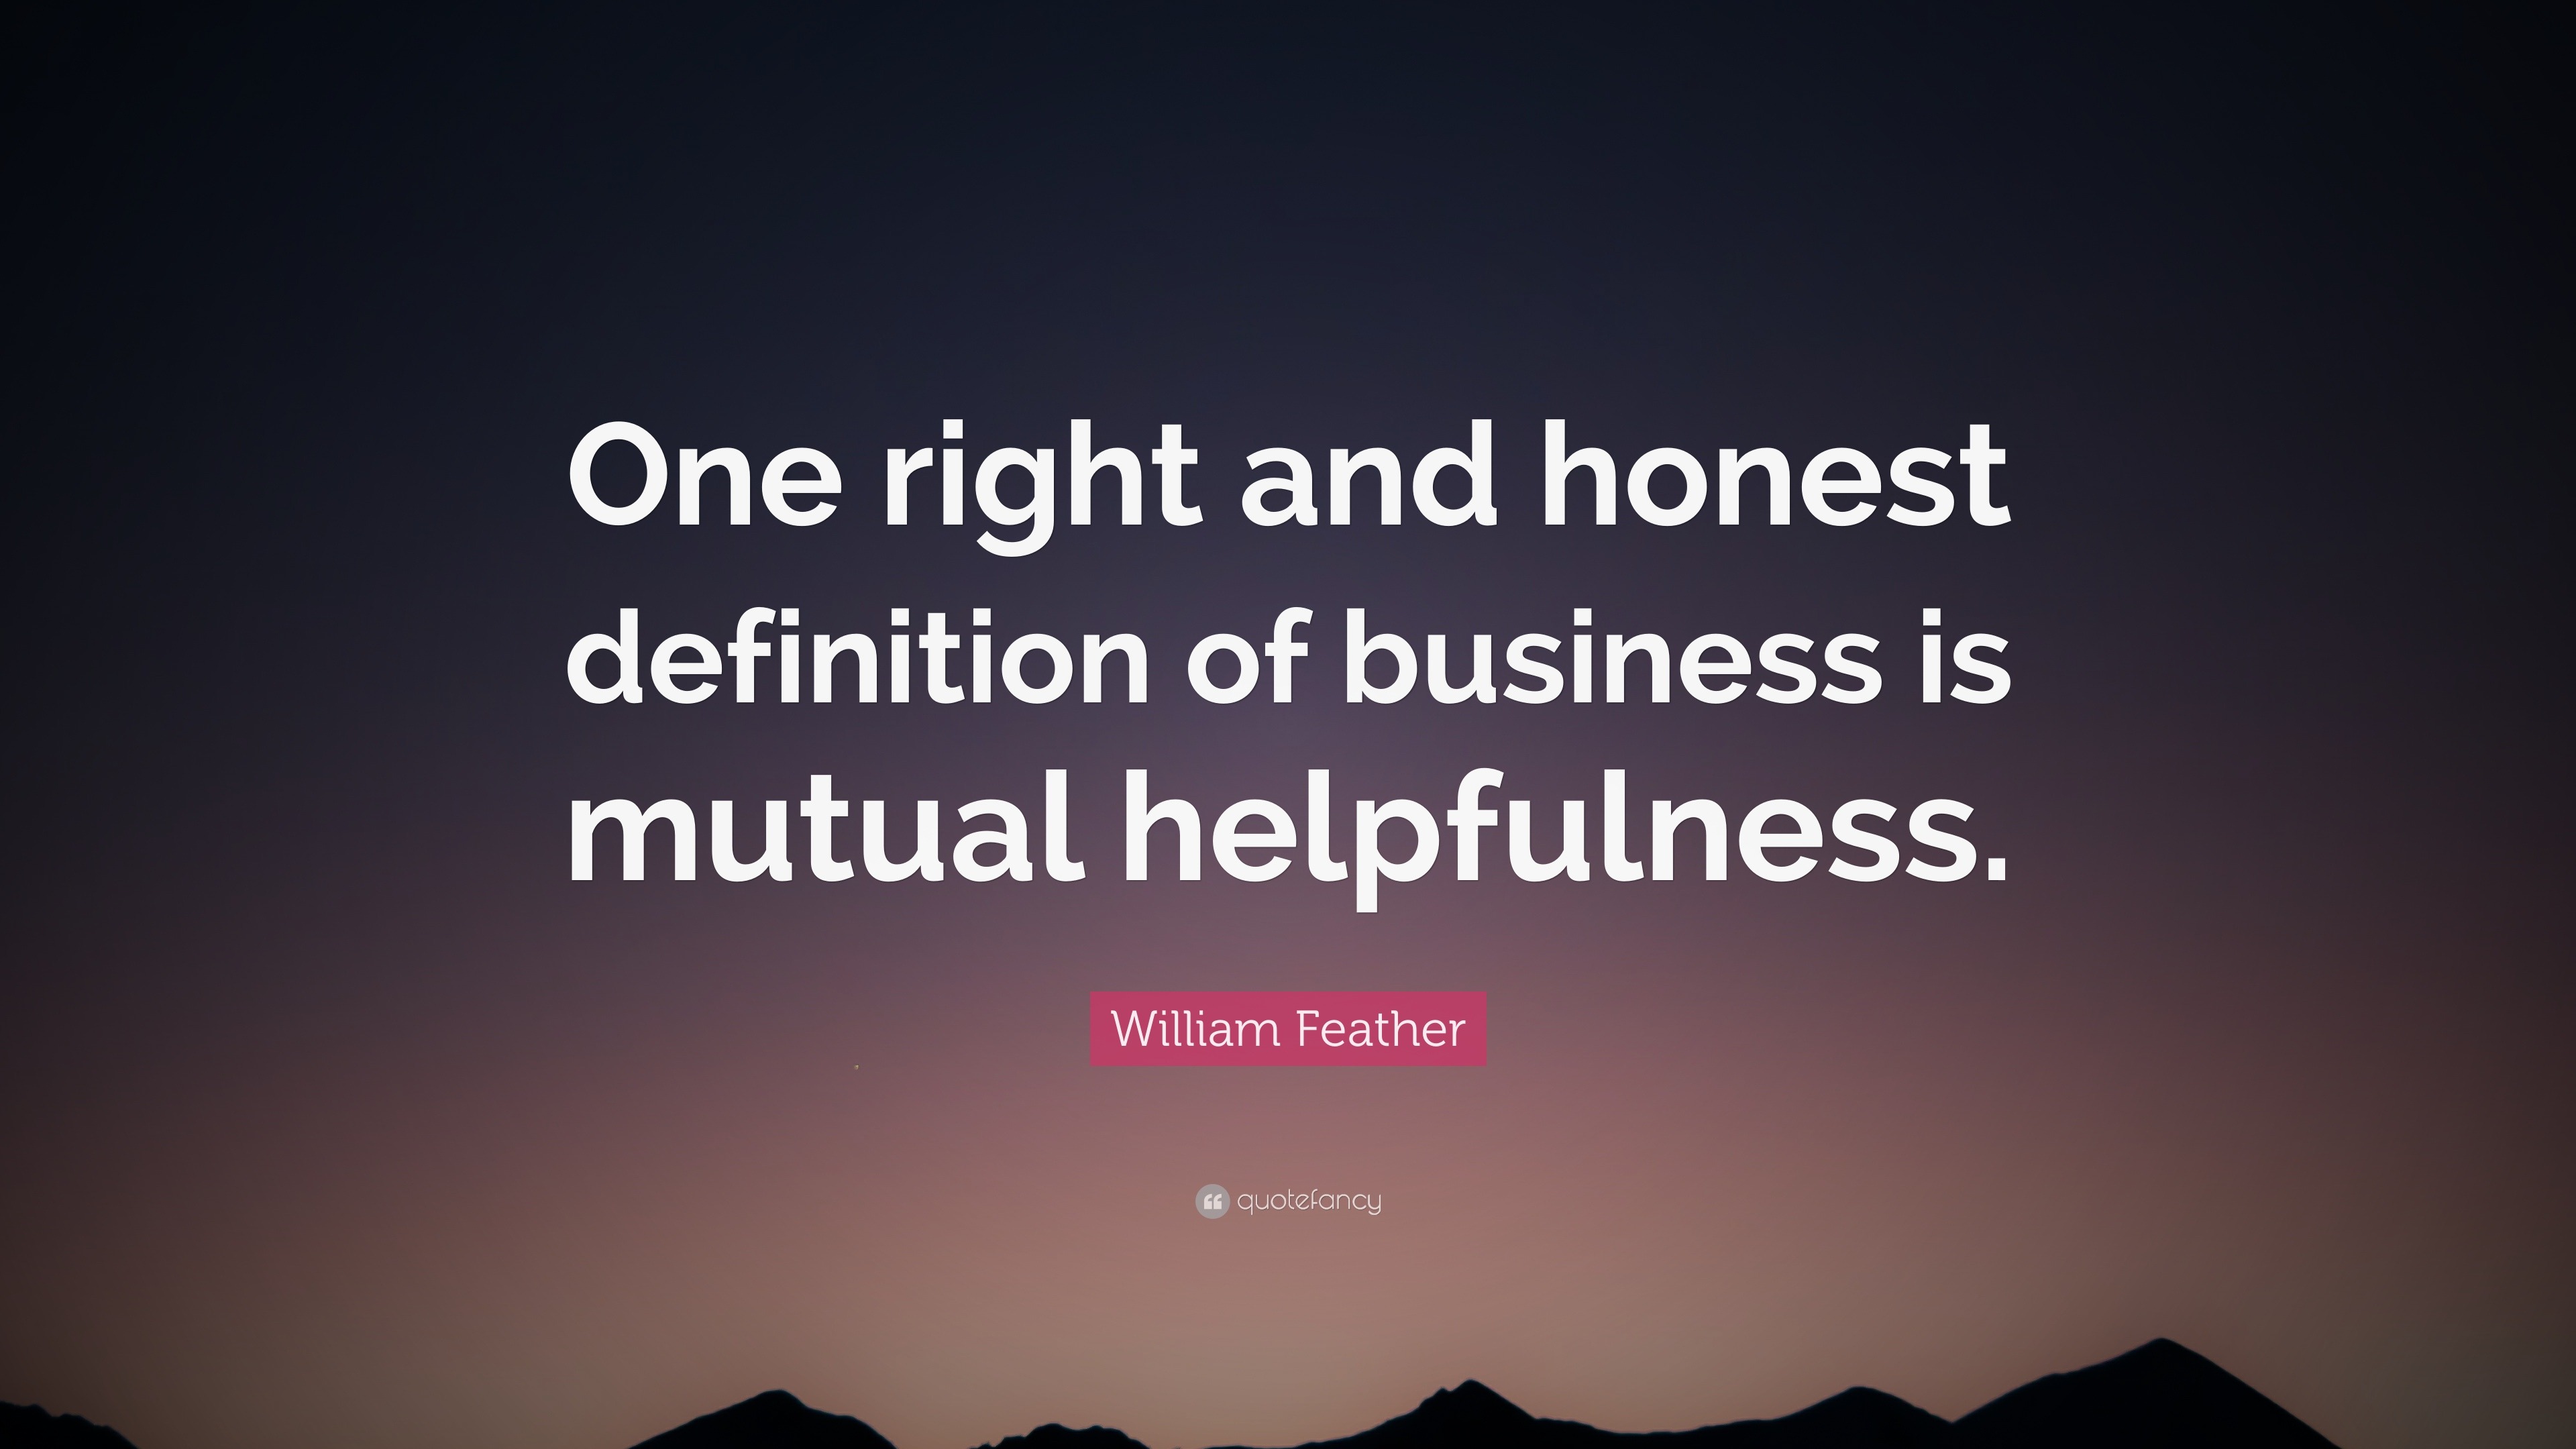 William Feather Quote: \u201cOne right and honest definition of business is mutual helpfulness.\u201d 10 